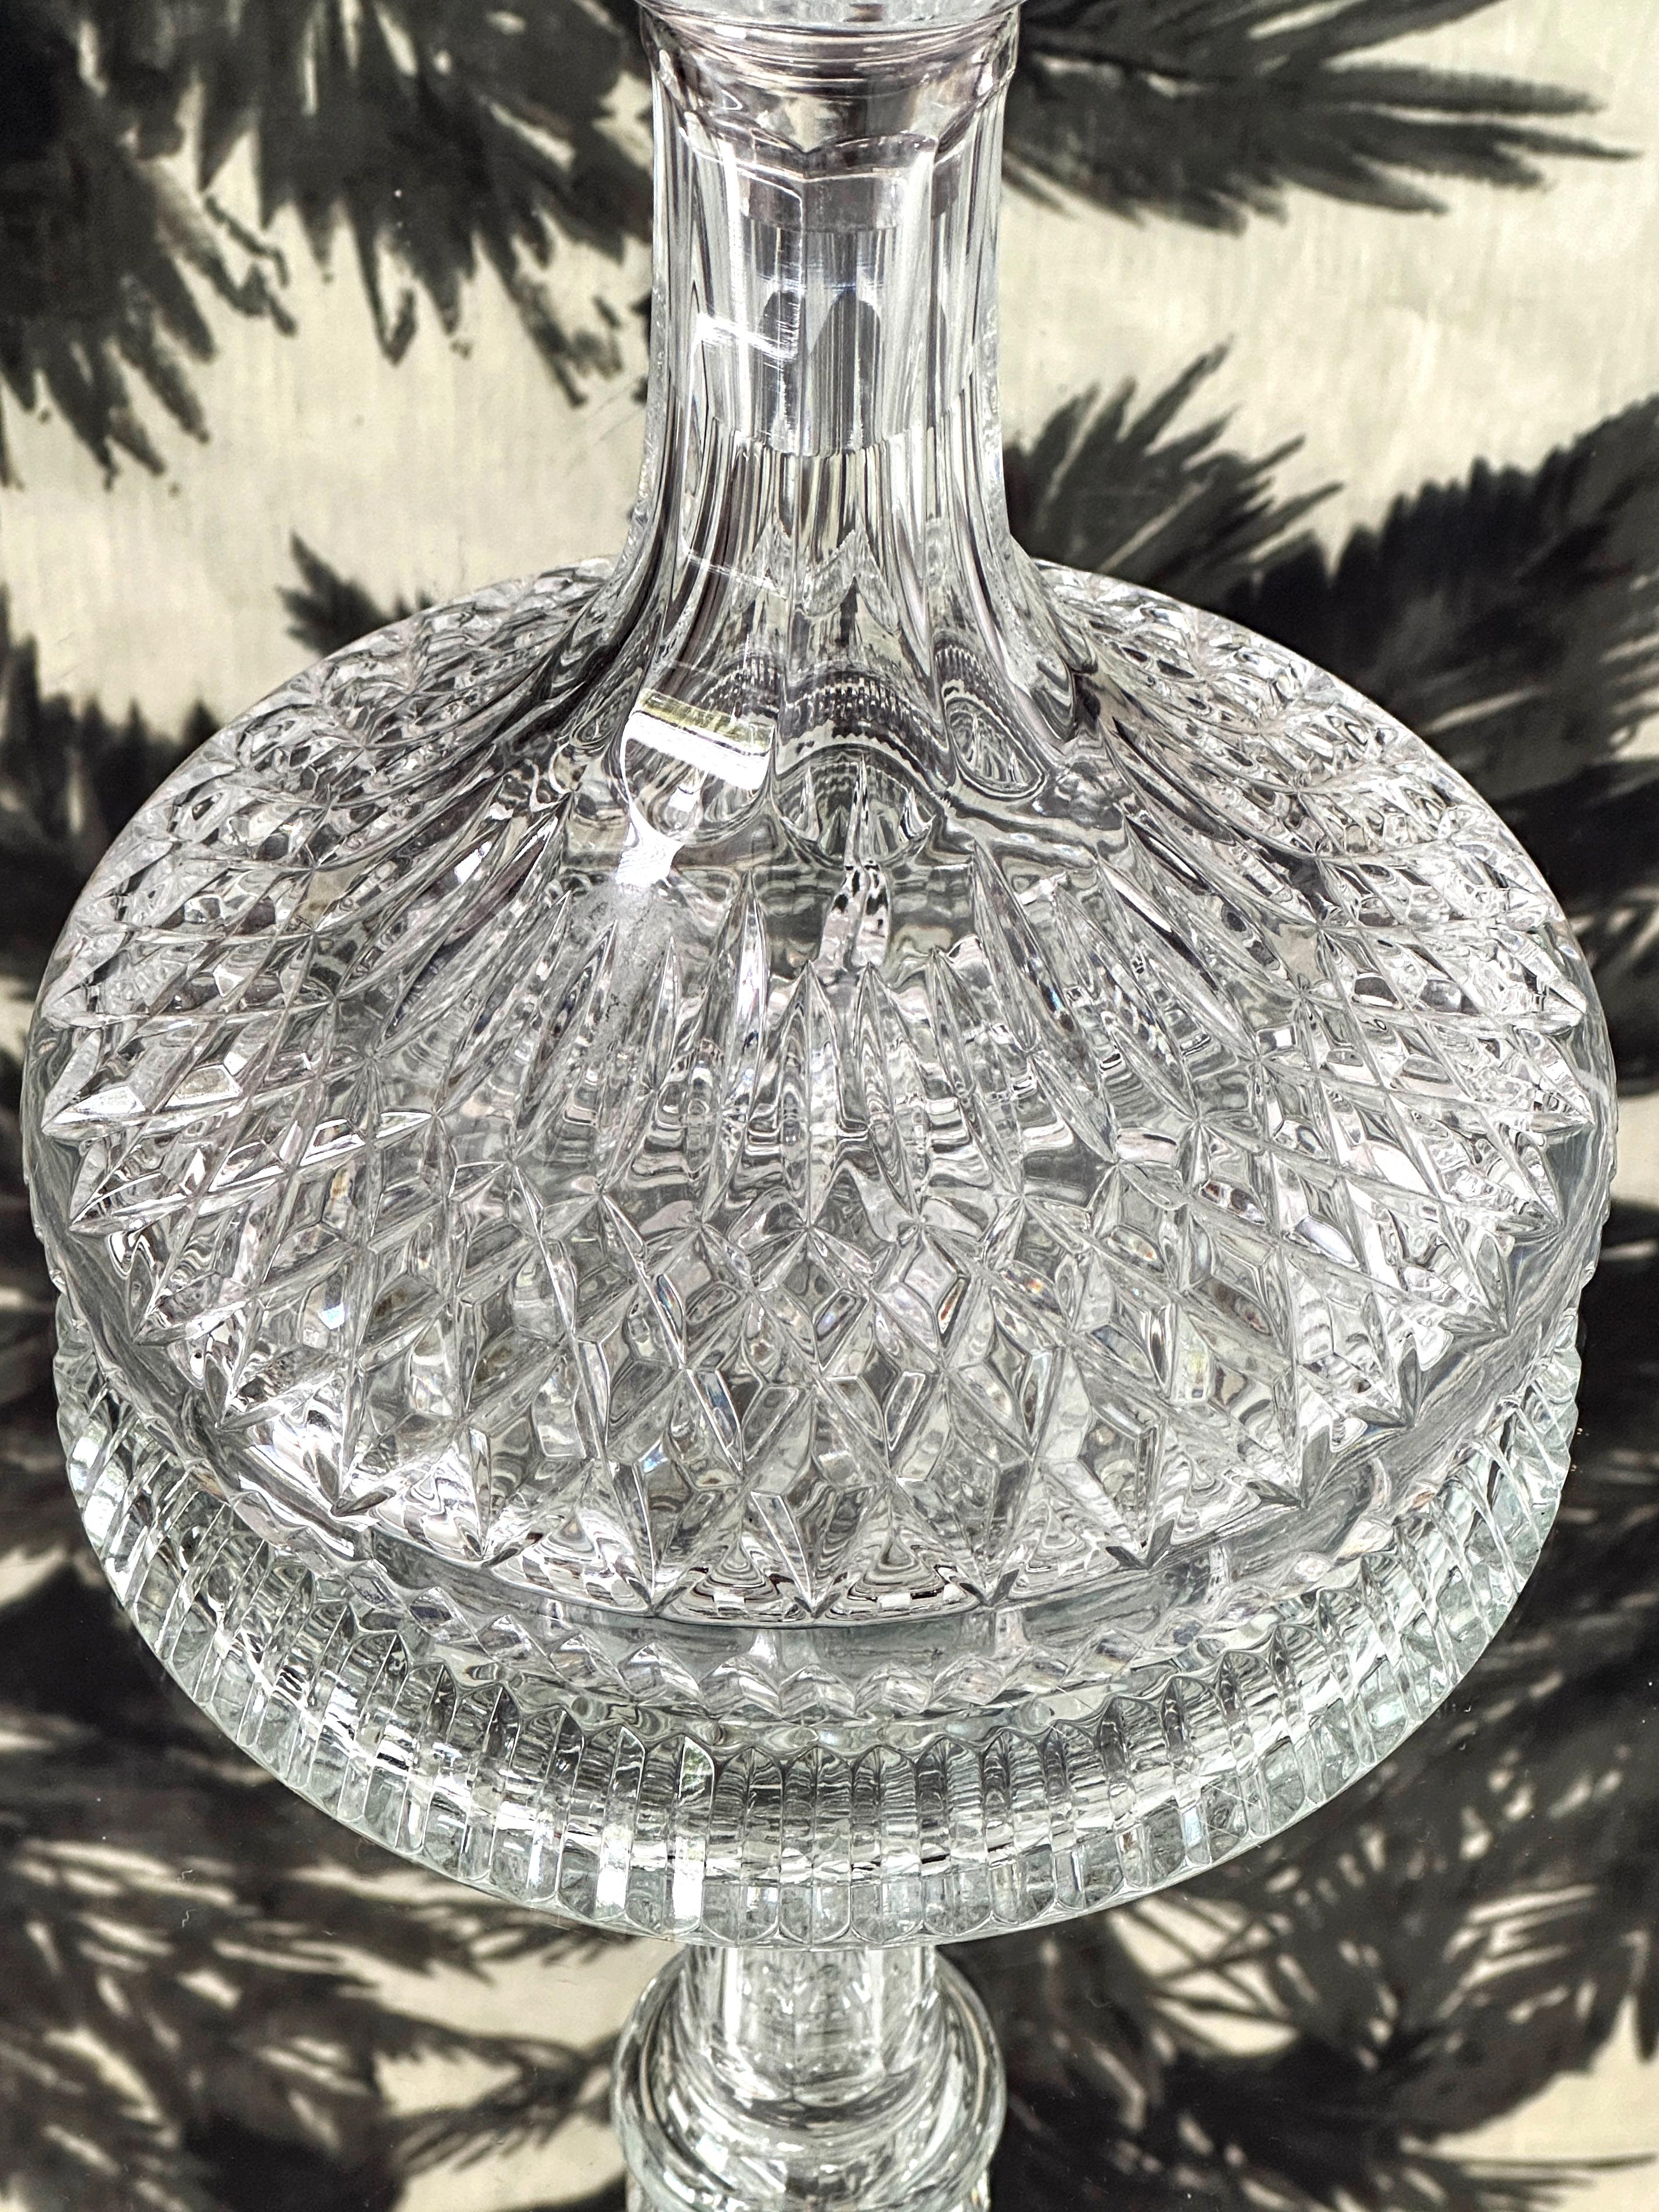 Etched Pair of Vintage Waterford Crystal Ships Decanters with Diamond Cuts, c. 1975